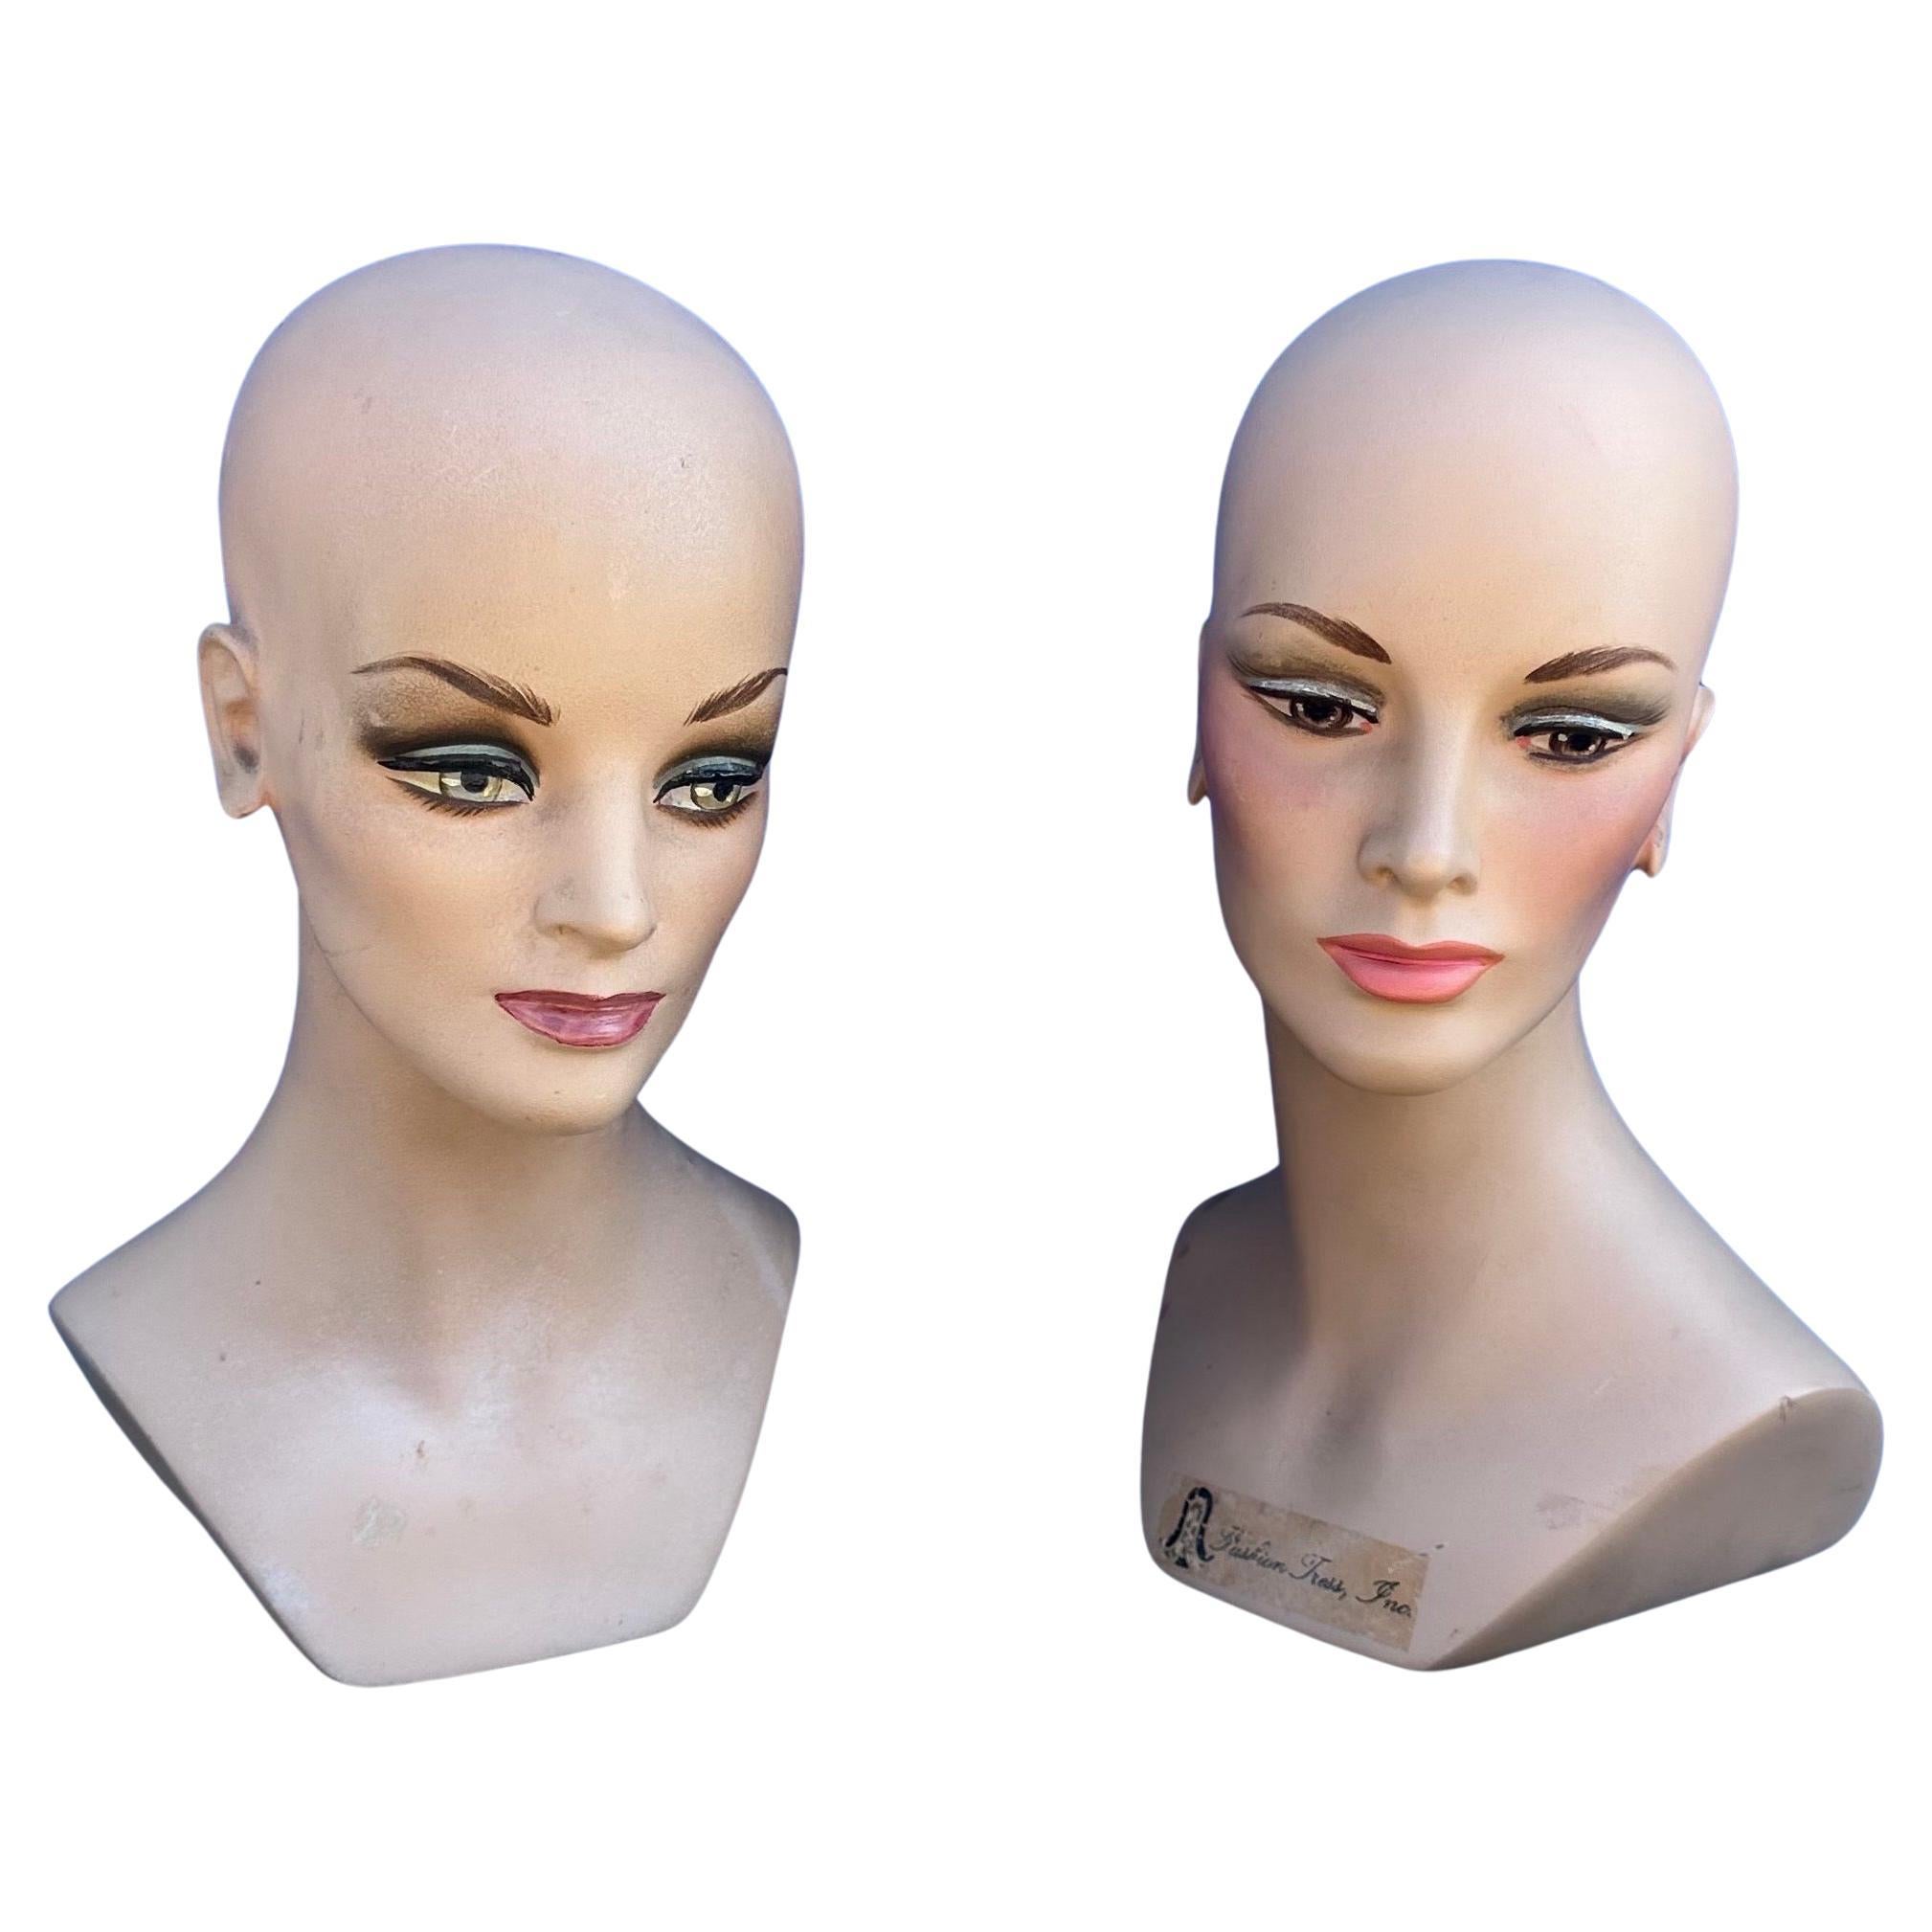 Pair of Vintage Art Deco Mannequin Heads / Busts  For Sale